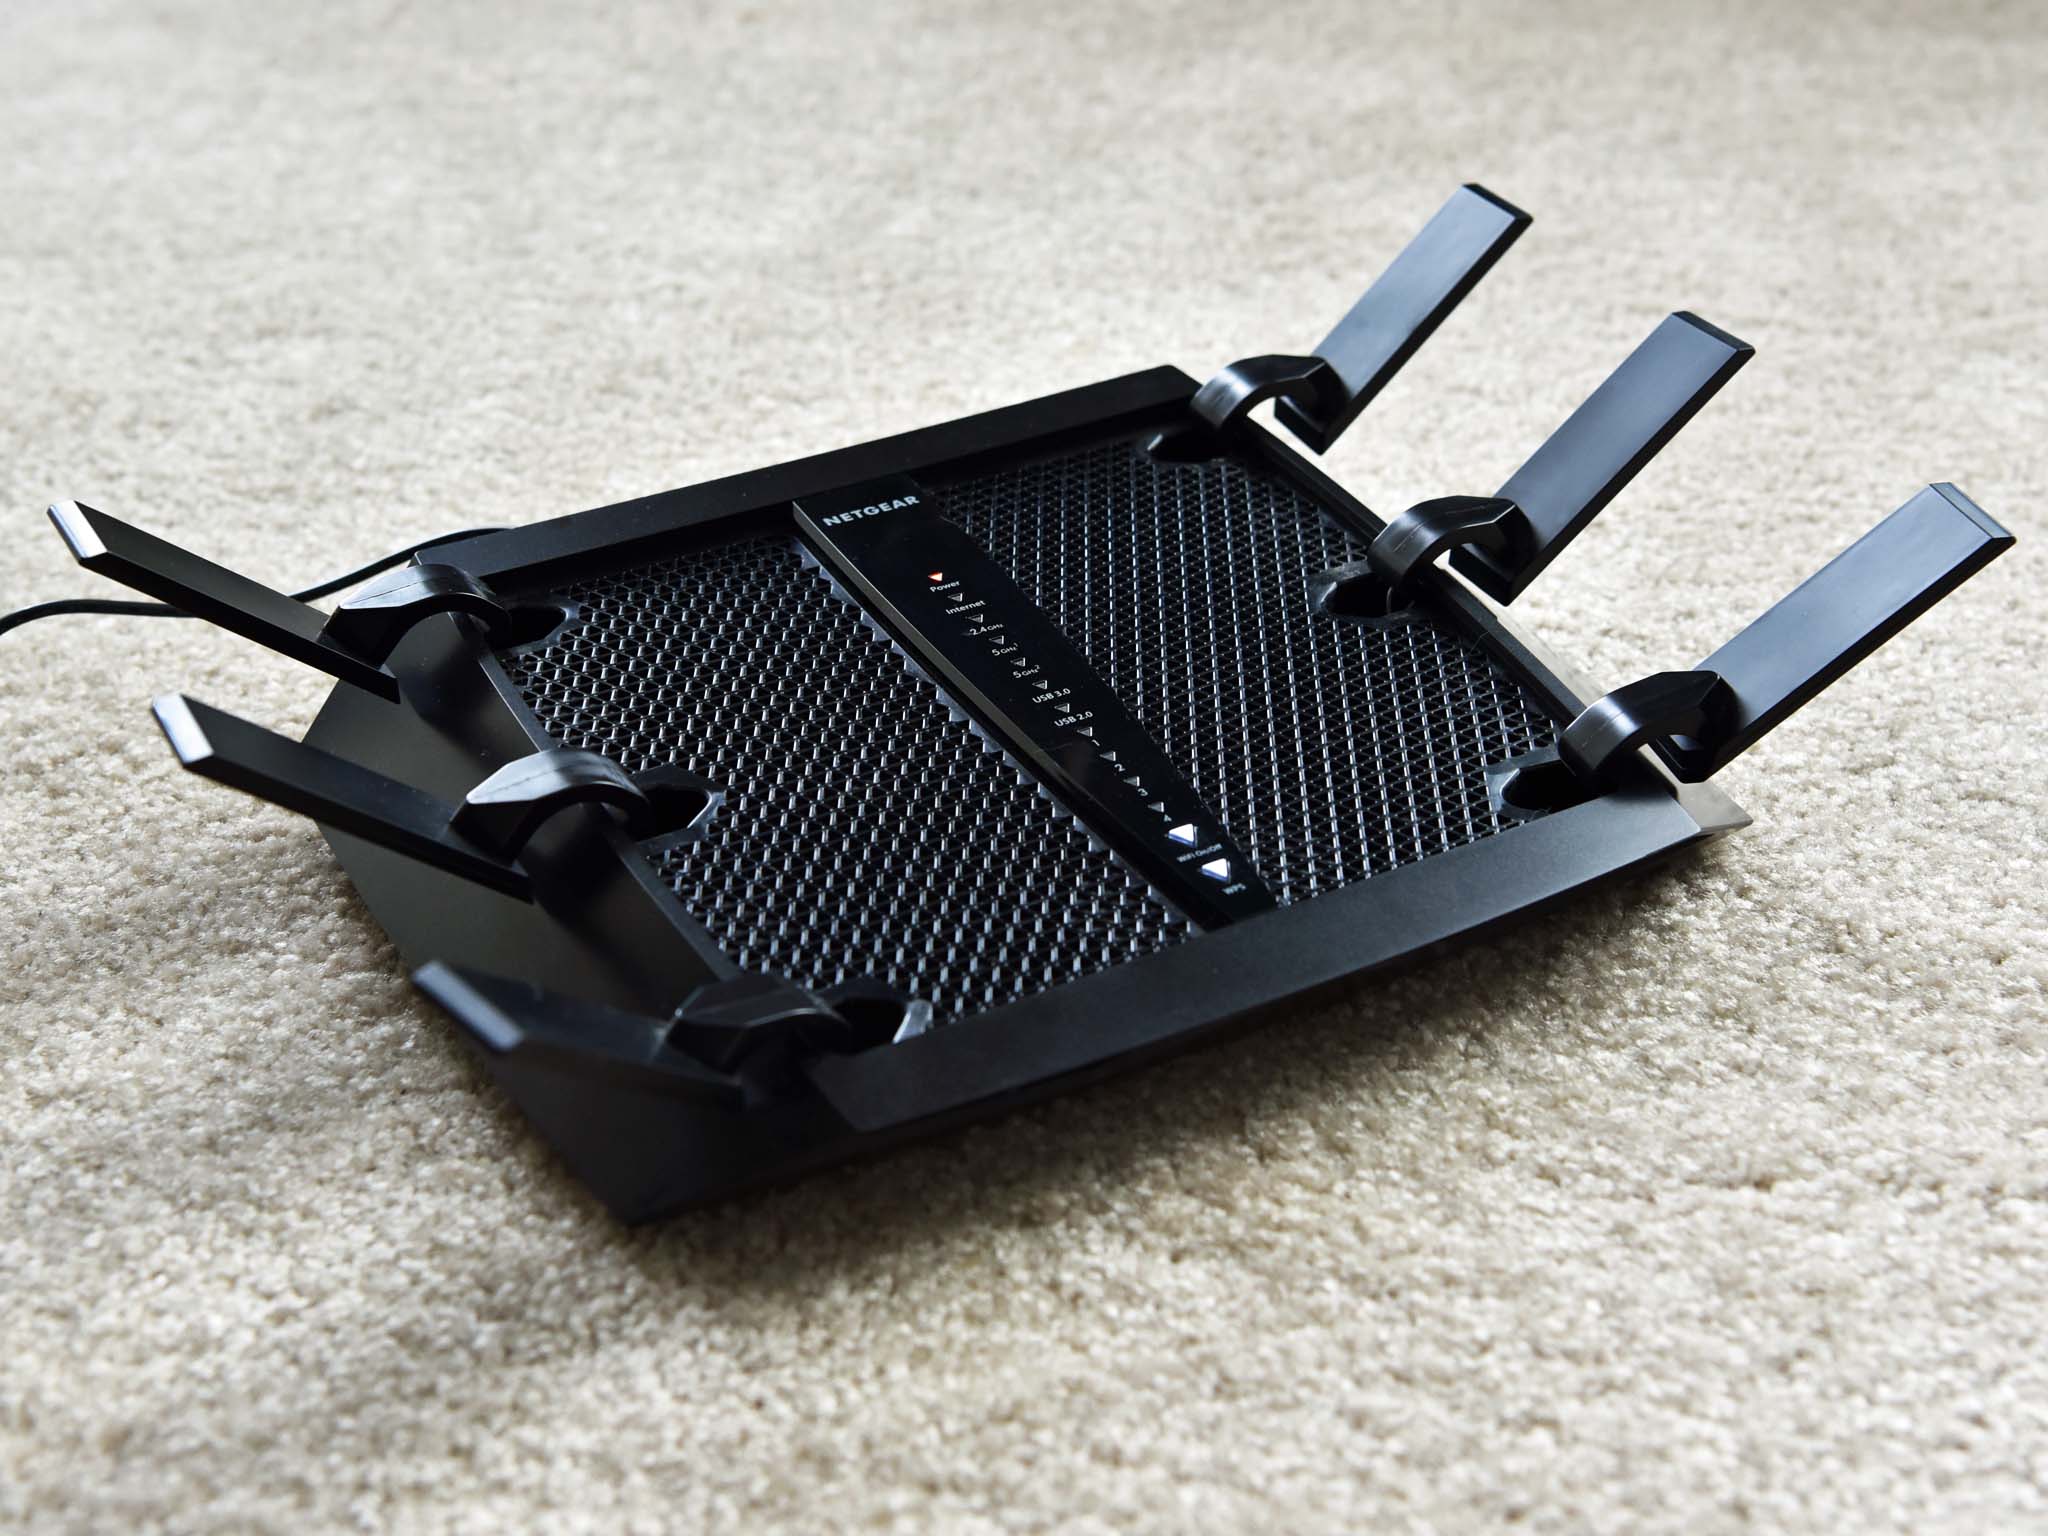 This is a fast Netgear Nighthawk router